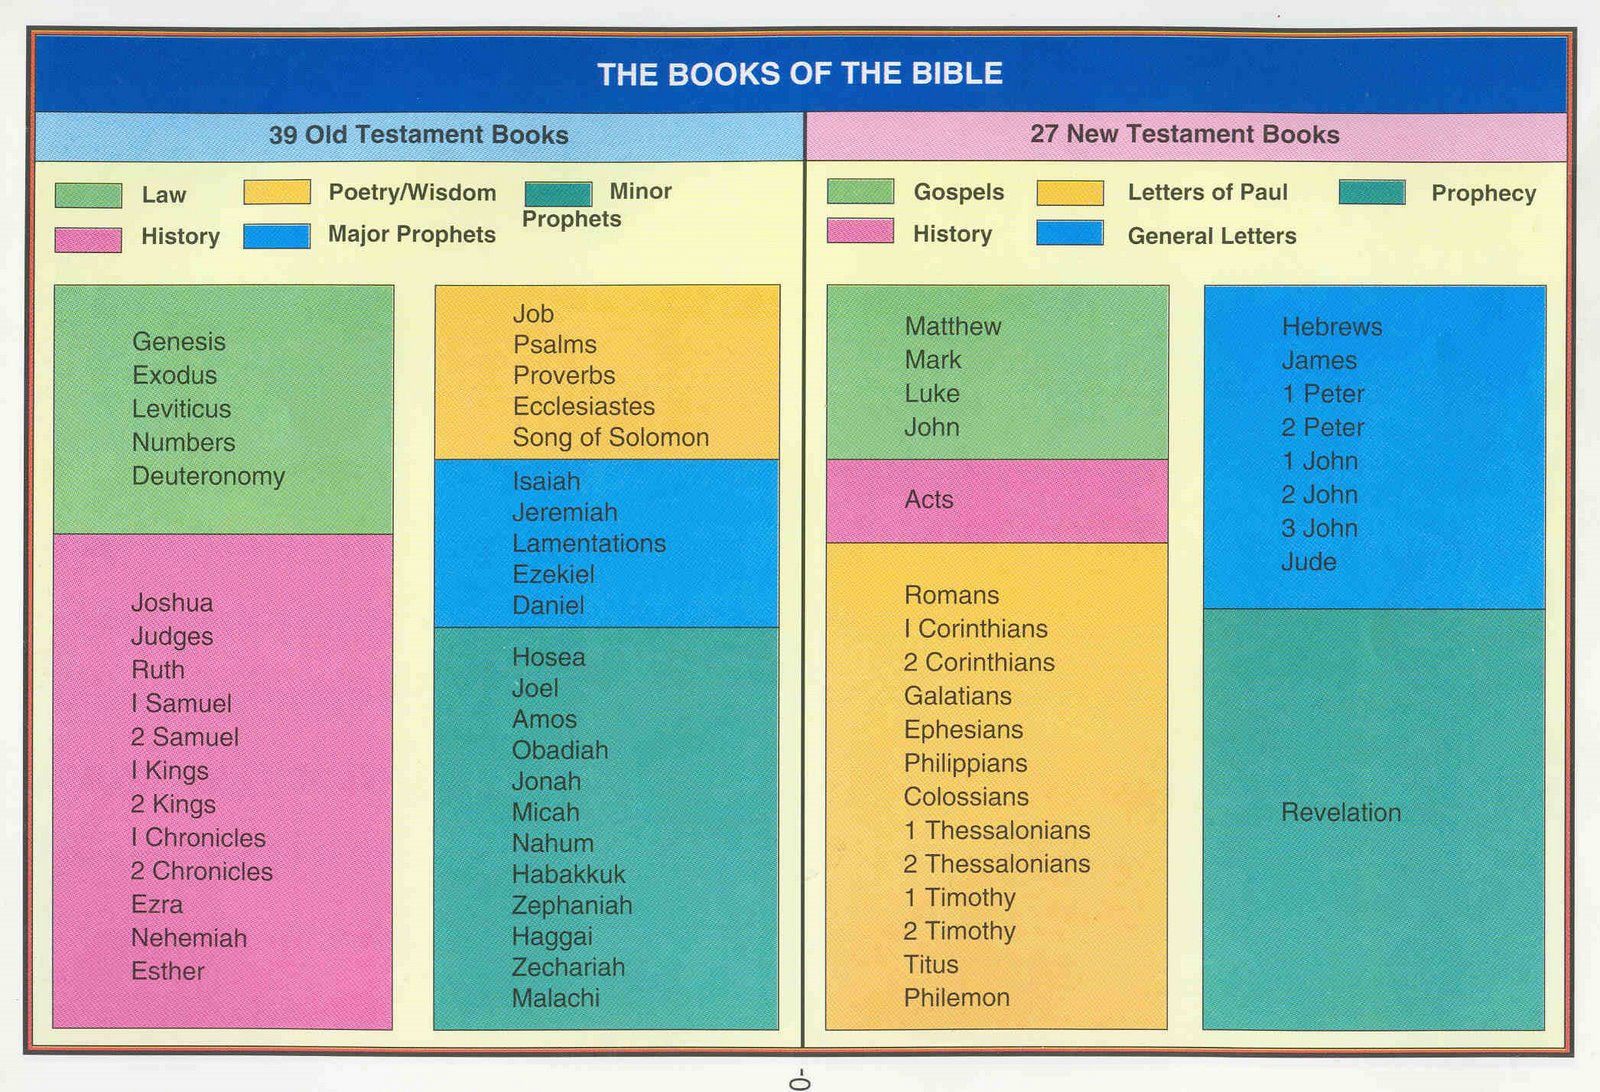 [The%20Books%20of%20the%20Bible.jpg]